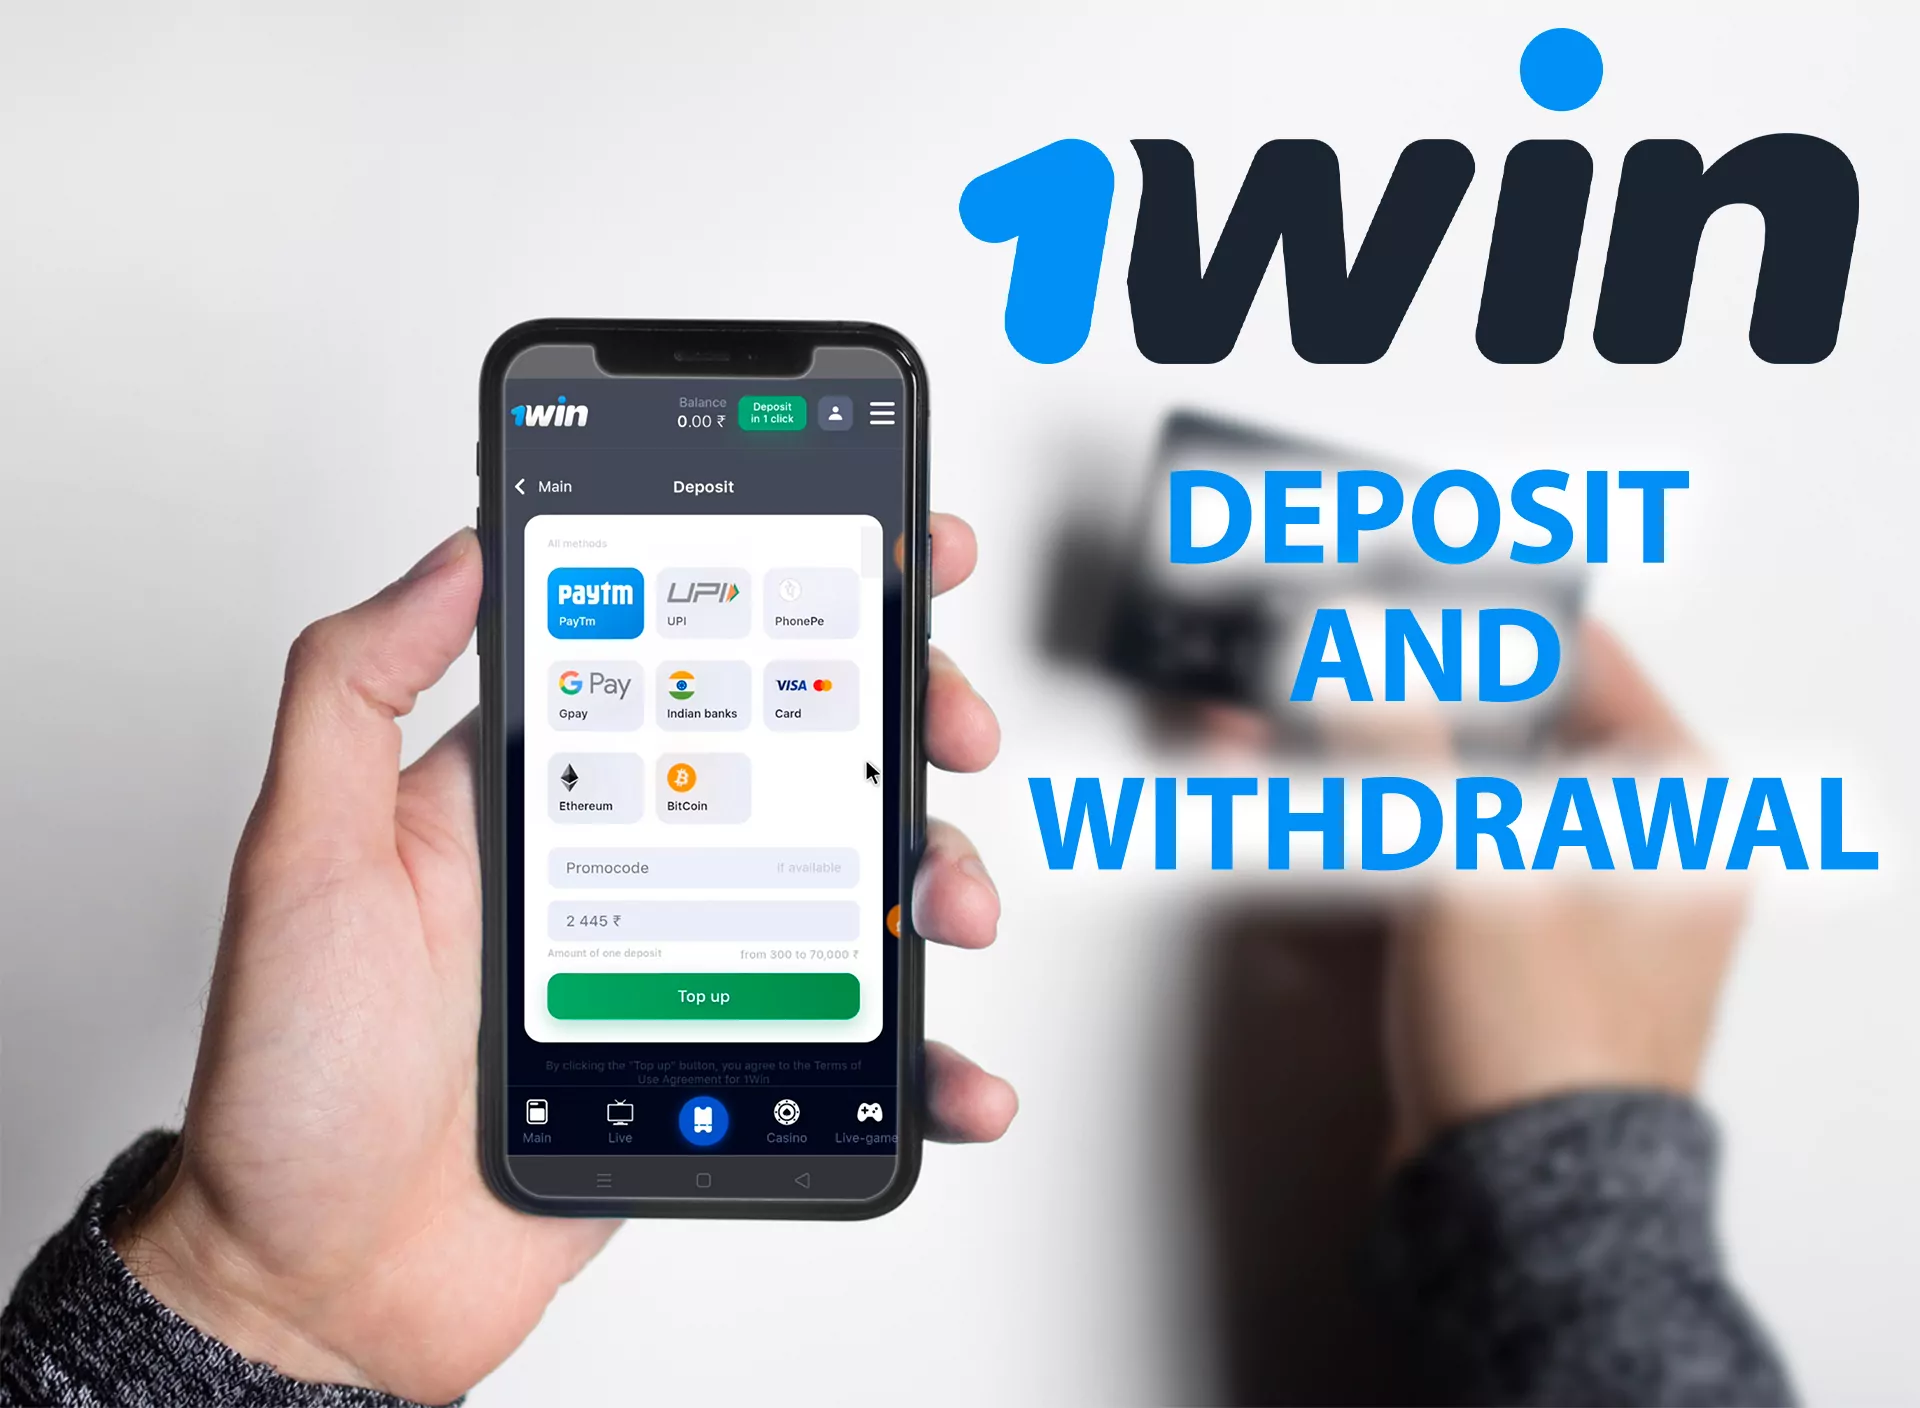 Make the first deposit with the most convenient method and get the 1win welcome bonus.